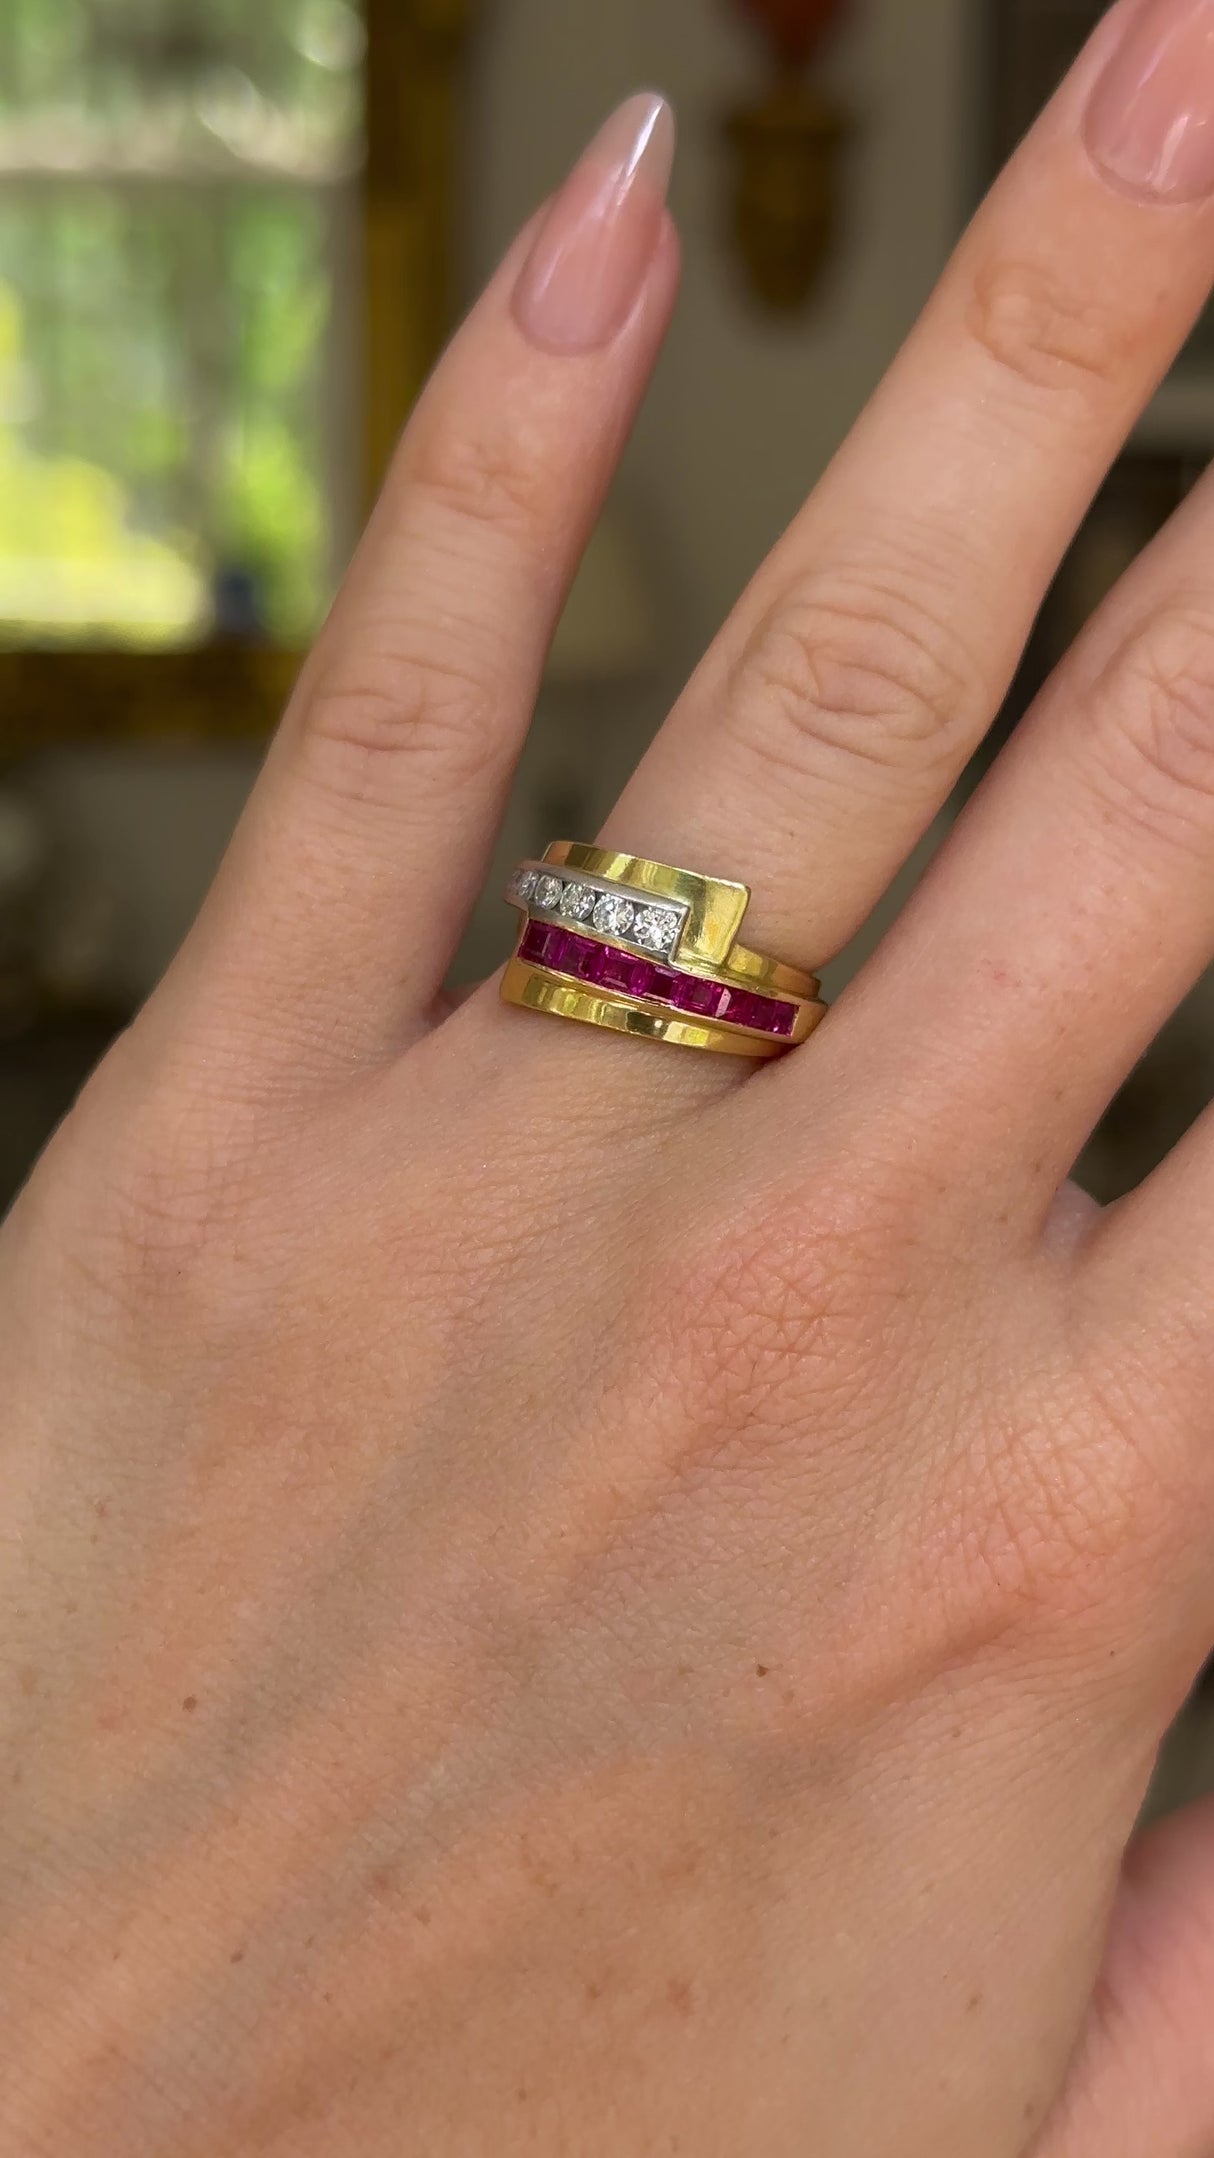 Retro Tiffany & Co. ruby and diamond ring  worn on hand and moved around to give perspective.